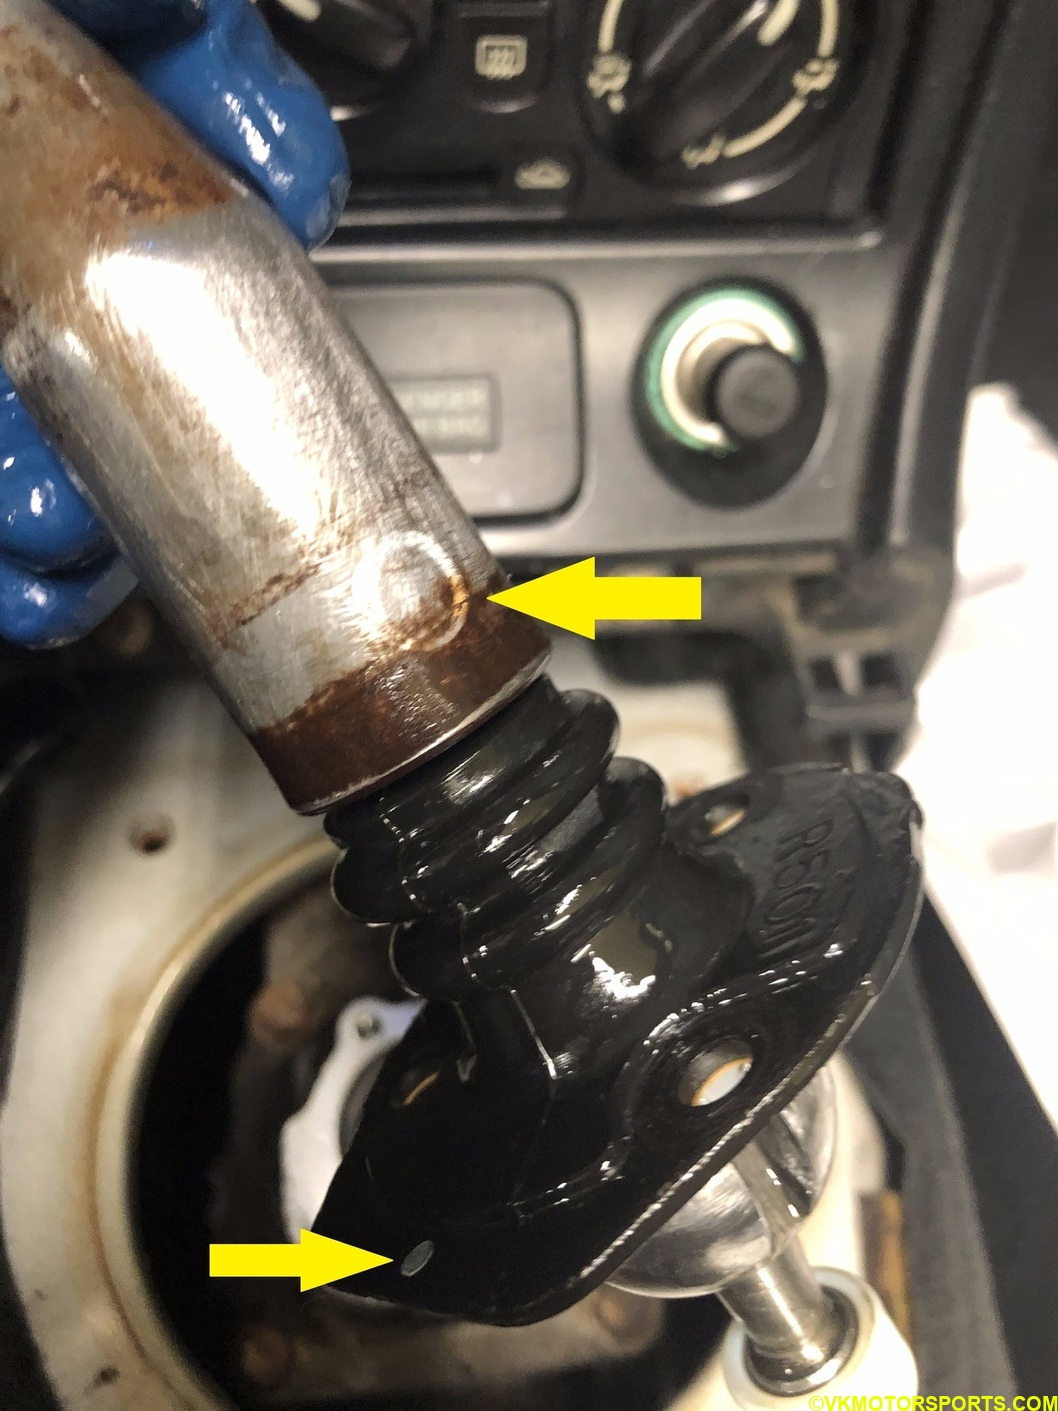 Figure 11a. White spots on the shifter shaft and the boot